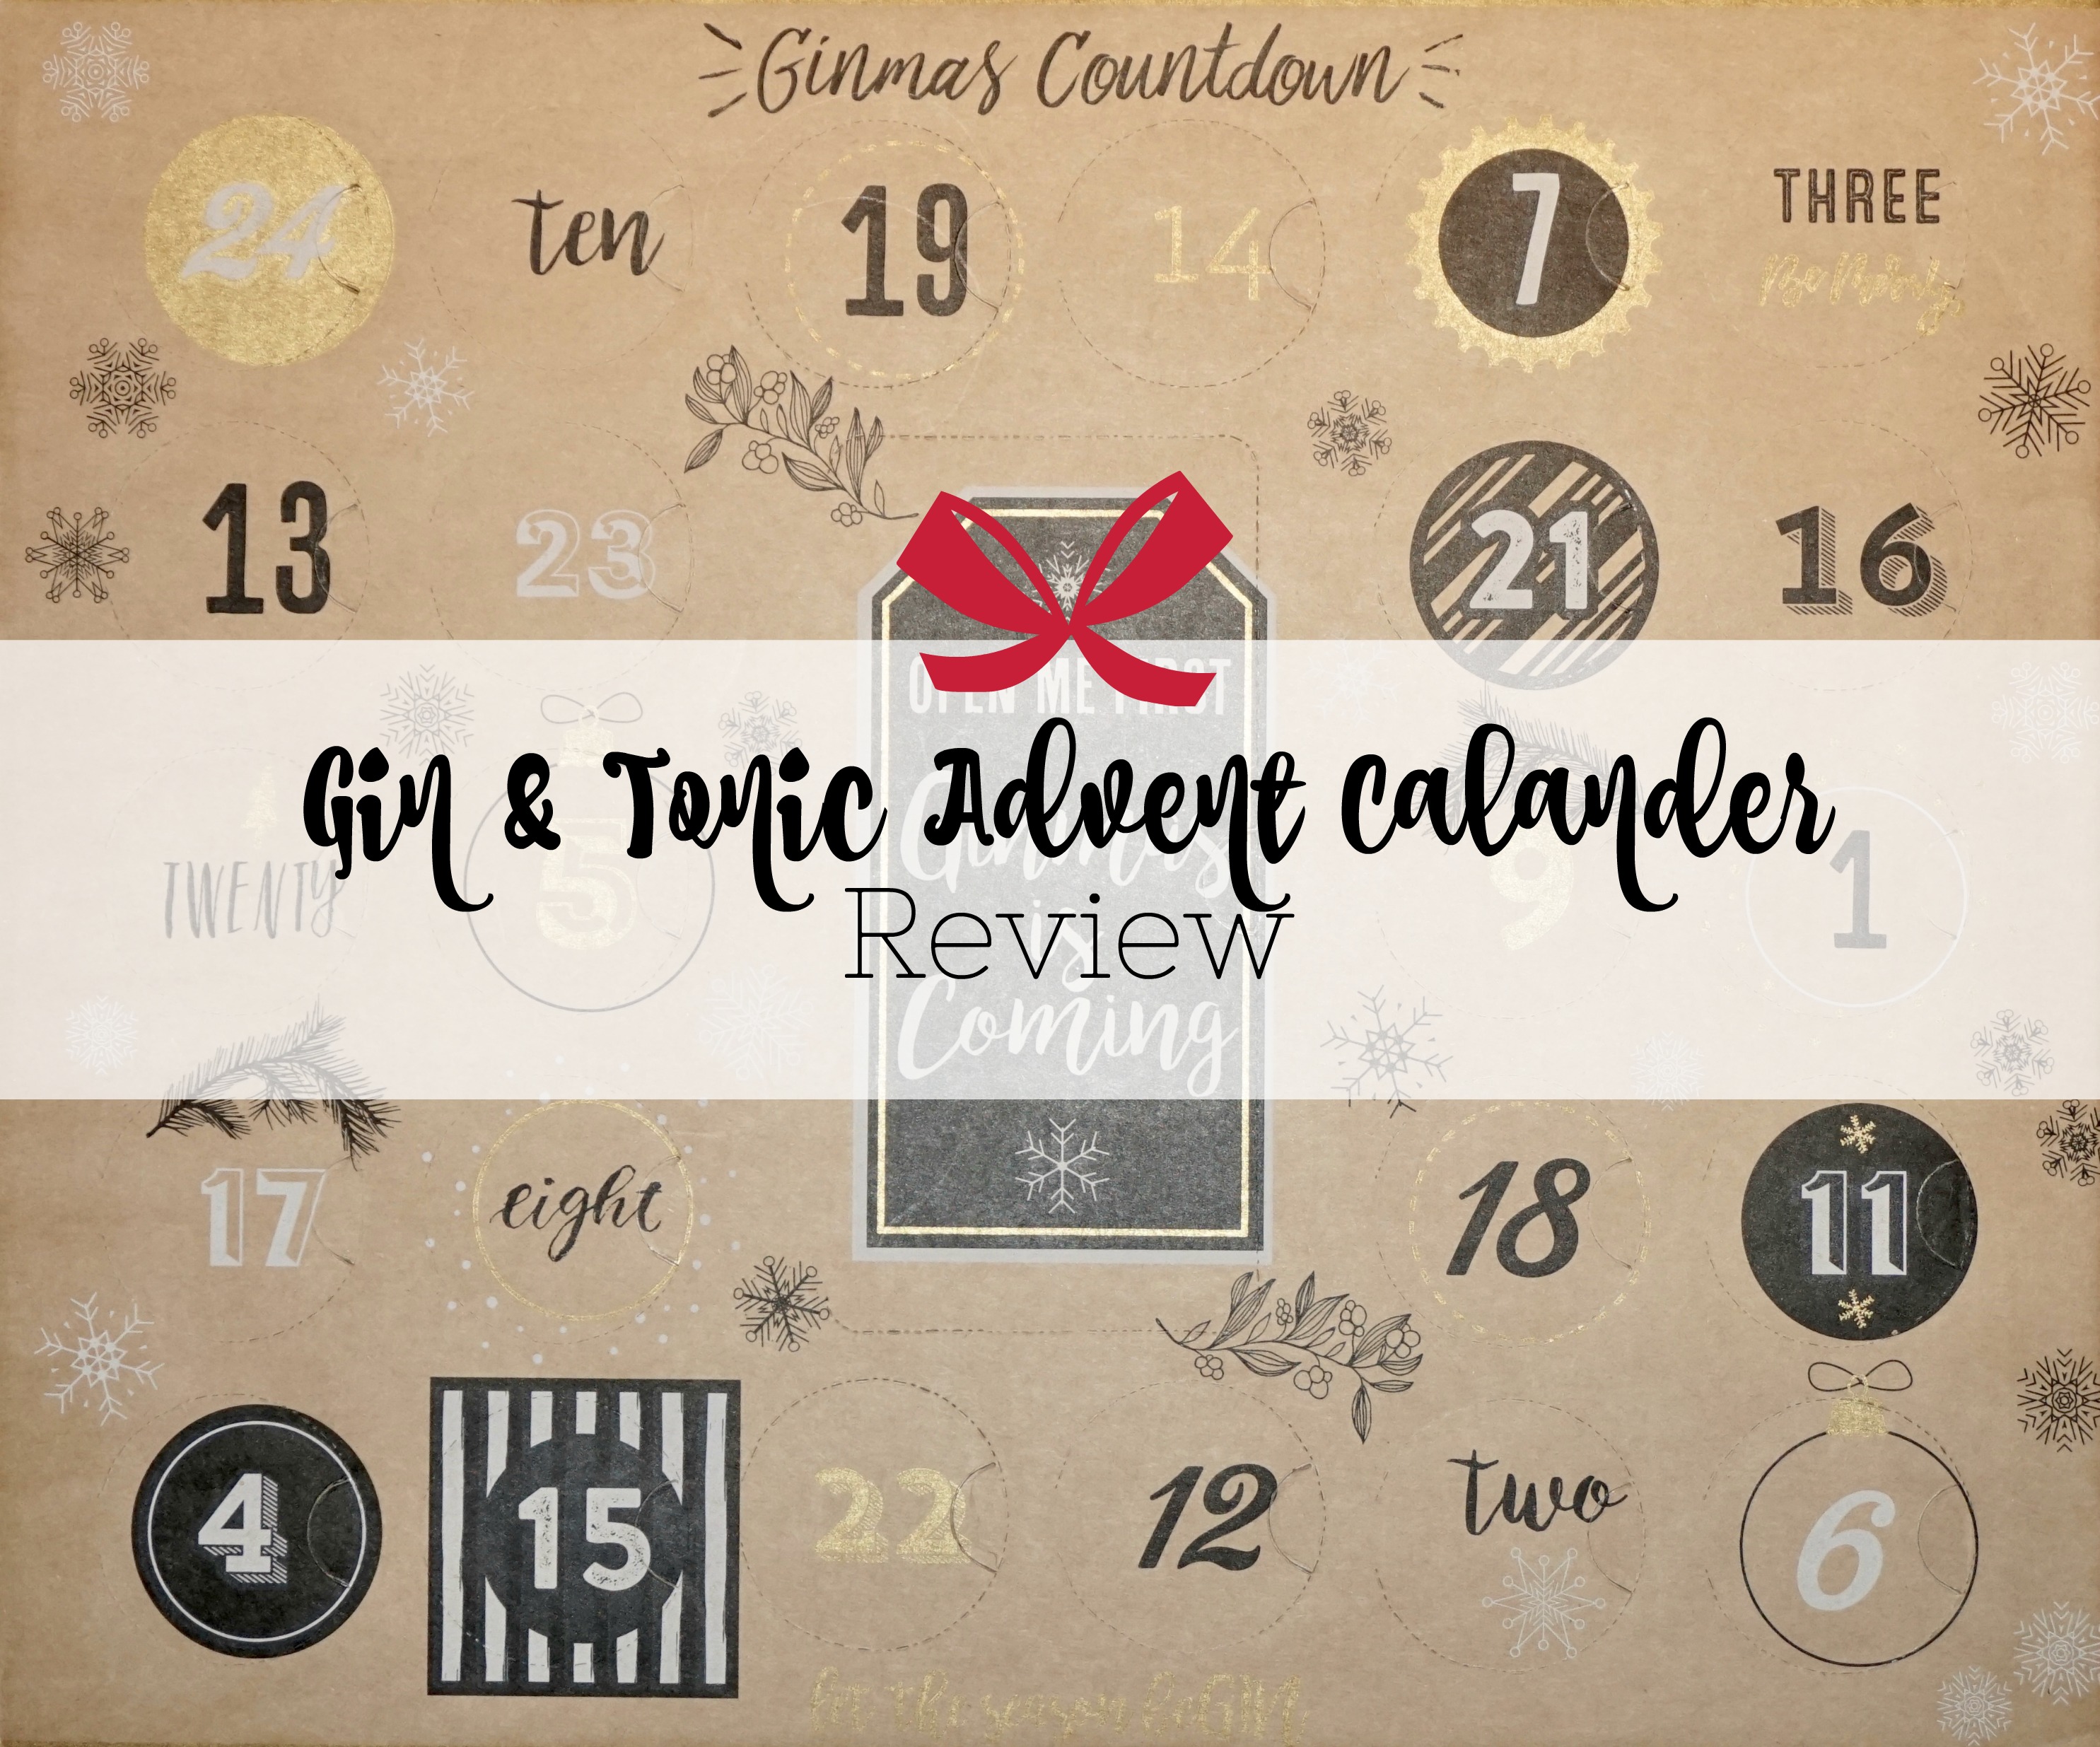 Gin and Tonic Advent Calendar Review